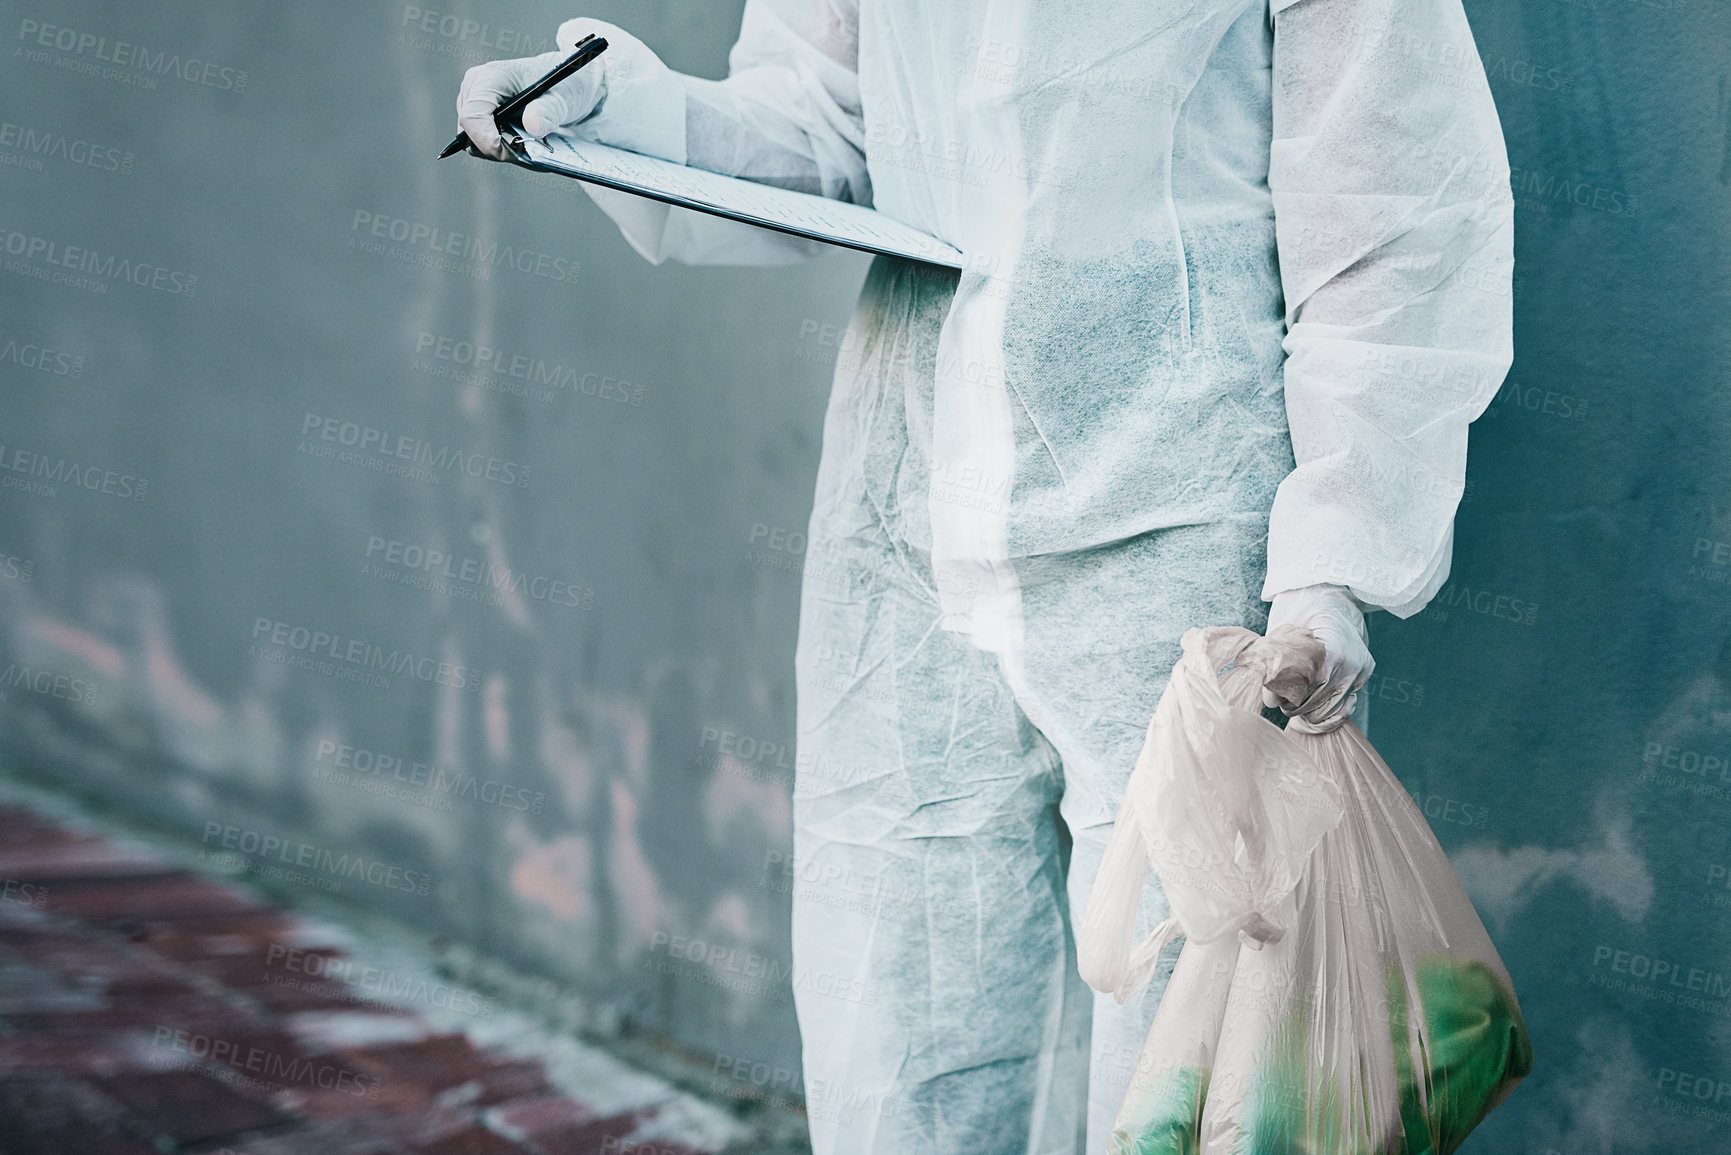 Buy stock photo Forensic investigator collecting evidence on a murder scene on a street holding a plastic bag and wearing a hazmat suit. Crime researcher doing a scientific criminal investigation outdoors in a city